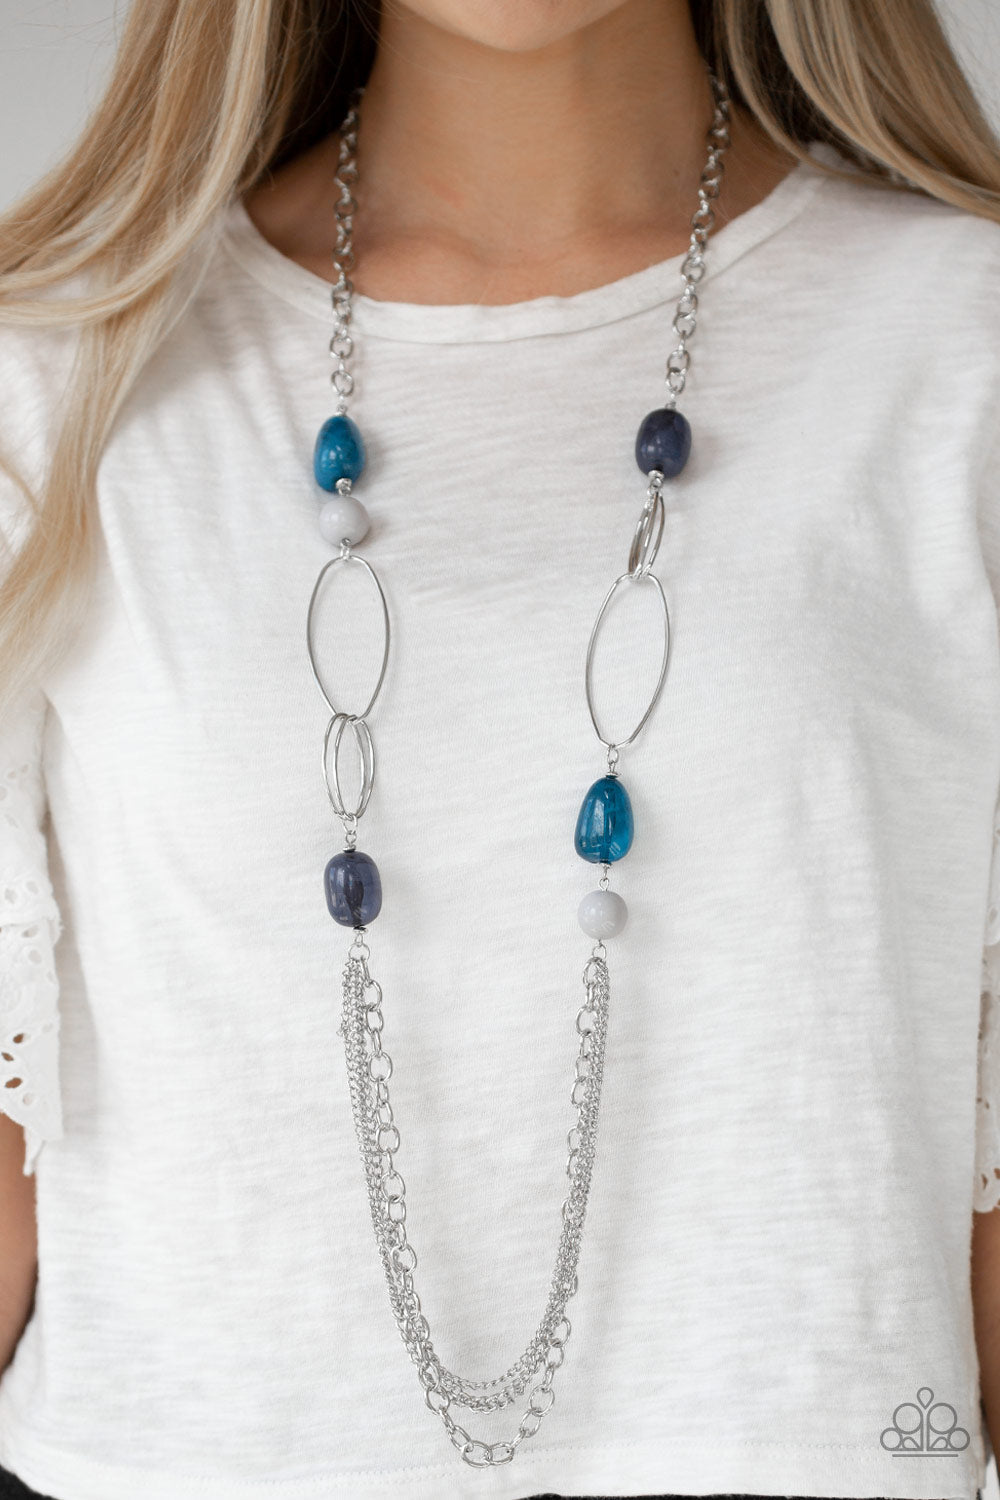 Pleasant Promenade - Multi Blue and Silver Necklace - Paparazzi Accessories - Polished and cloudy faux rock finishes, gray and blue beads link with bold silver hoops. The whimsical compilation gives way to layers of mismatched silver chains for a seasonal finish. Features an adjustable clasp closure necklace.